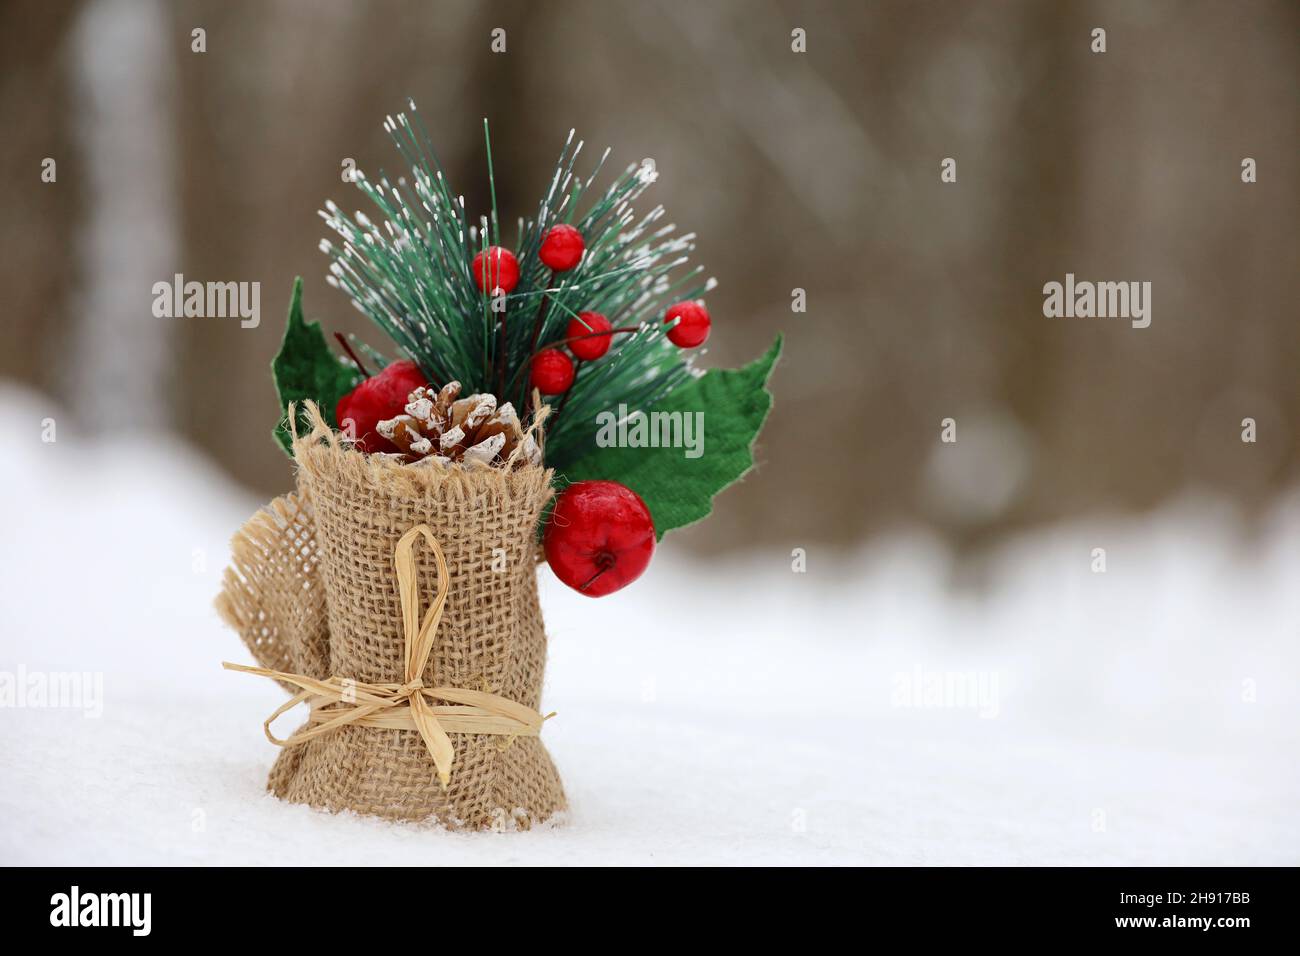 Greeting card with Christmas decorations in the snow on winter forest background. Canvas bag with New Year tree, pine cone and red berries Stock Photo